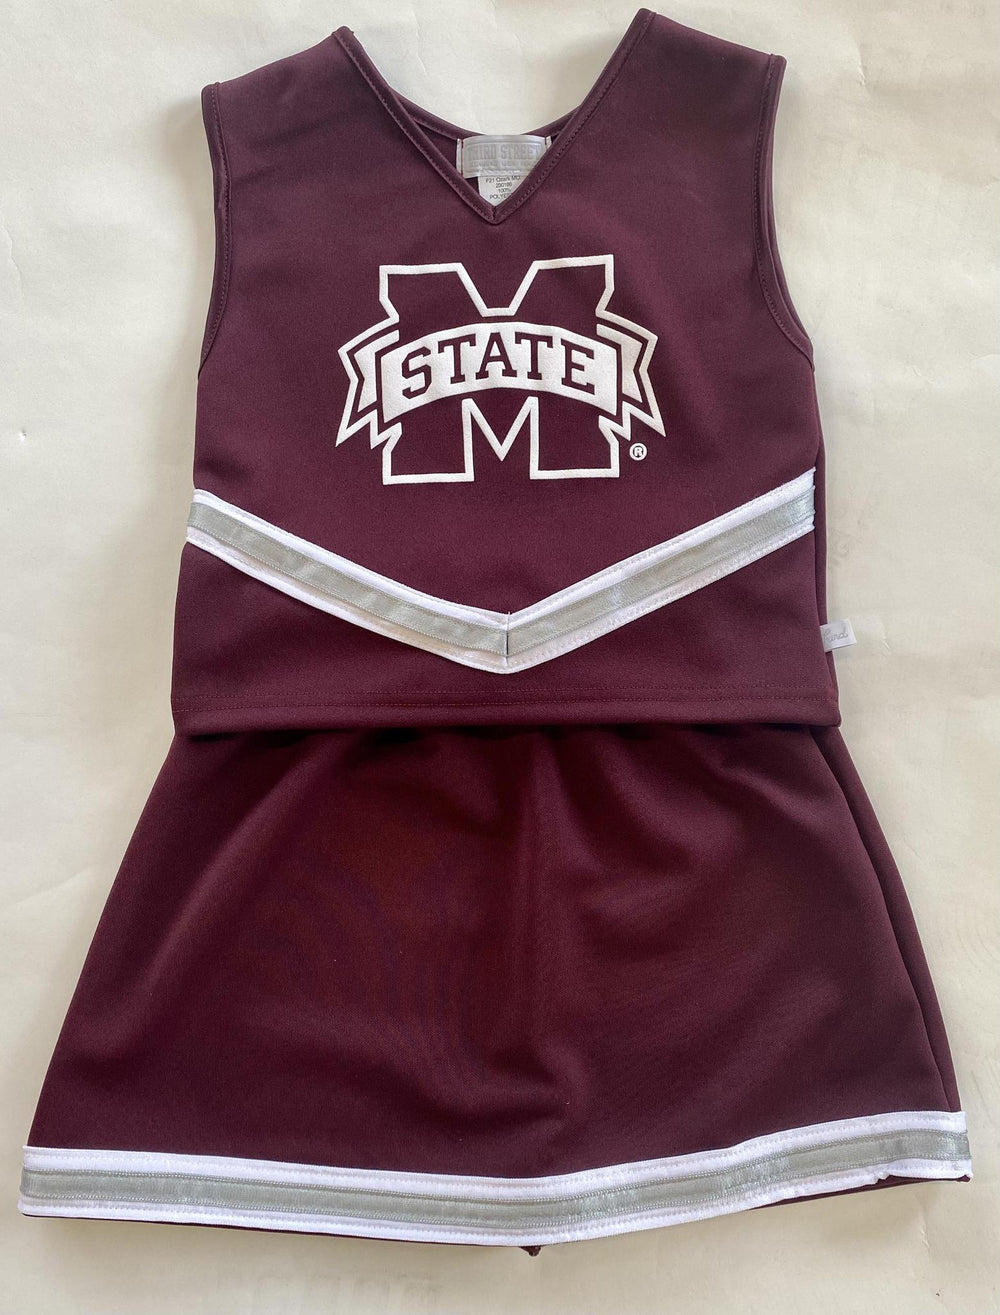 Third Street MSU Maroon Cheer Outfit for Kids and Youth